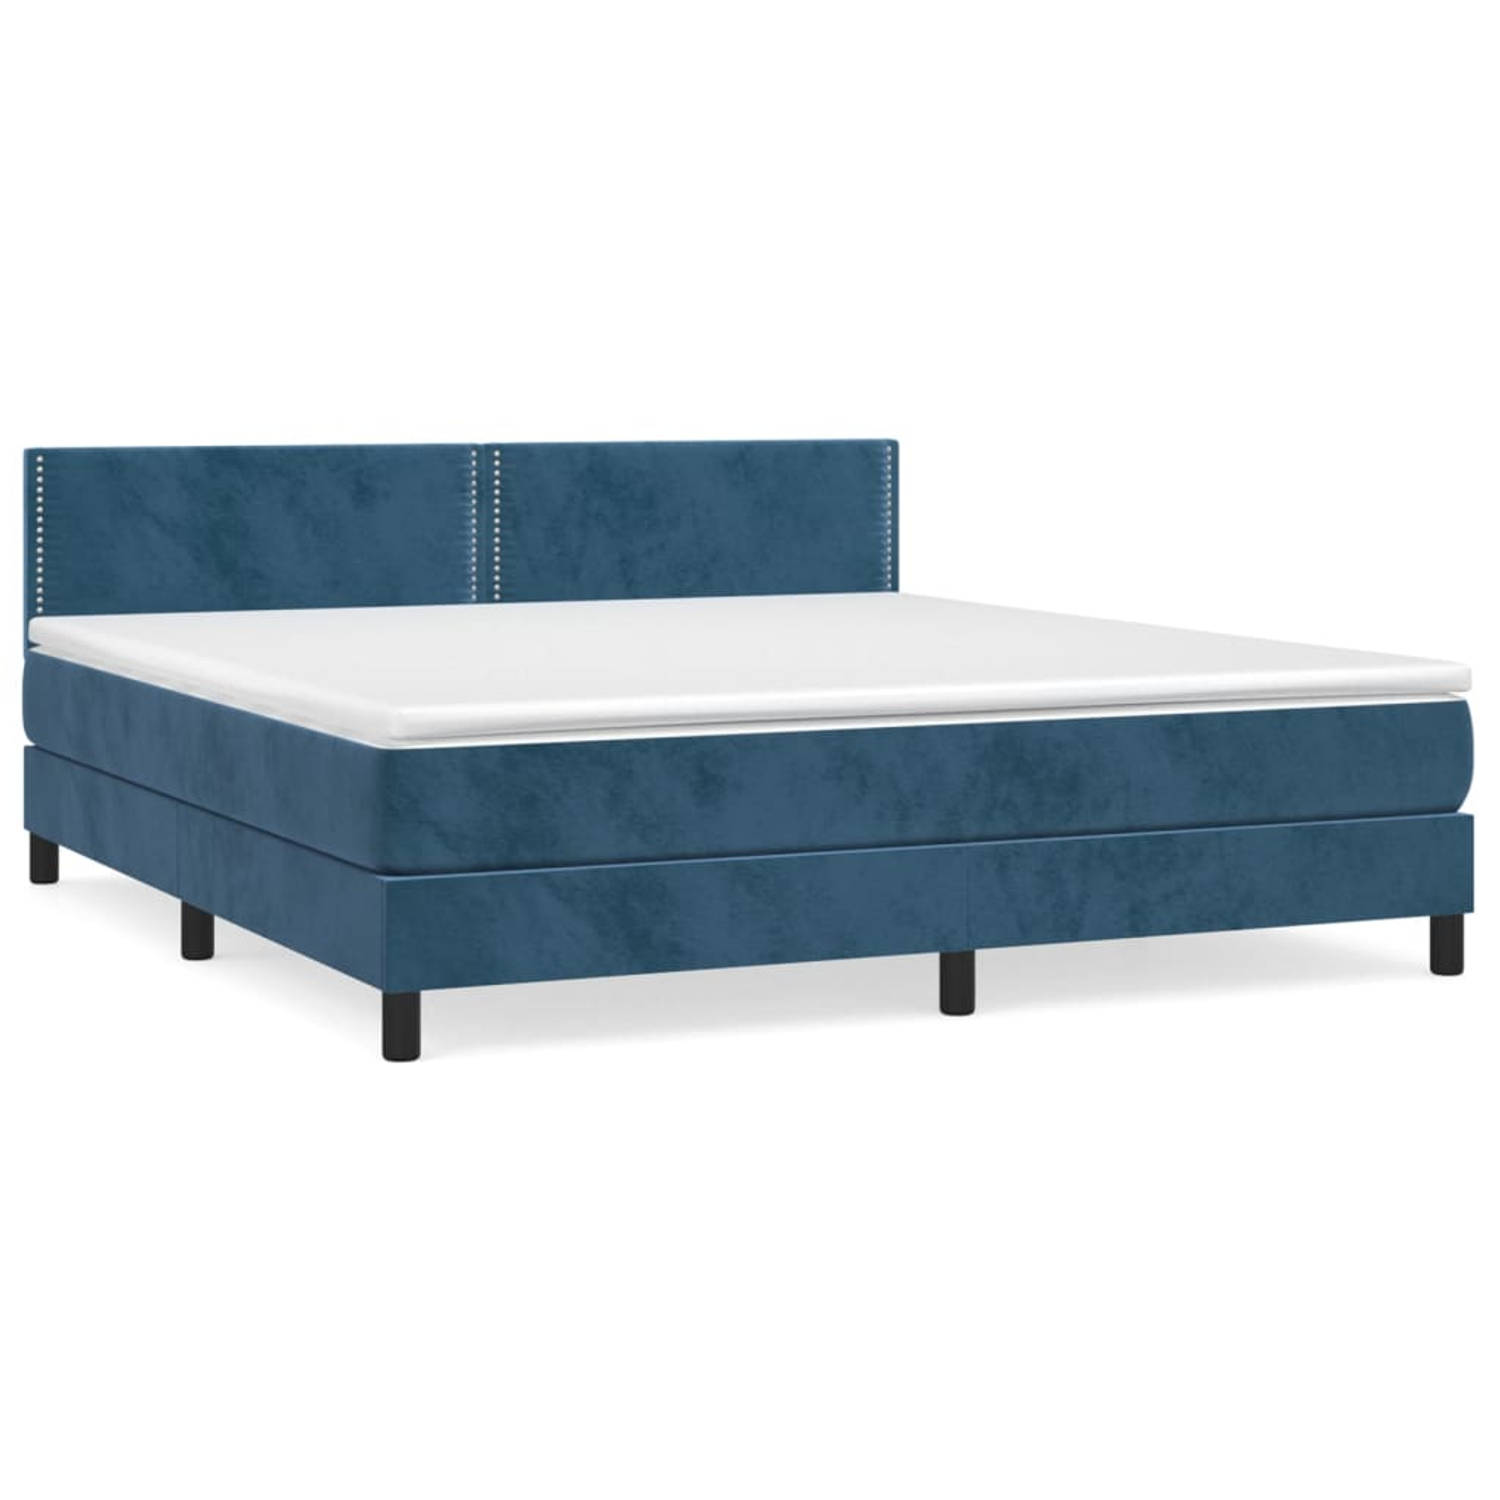 The Living Store Boxspringbed - donkerblauw - 203x180x78/88 cm - fluweel